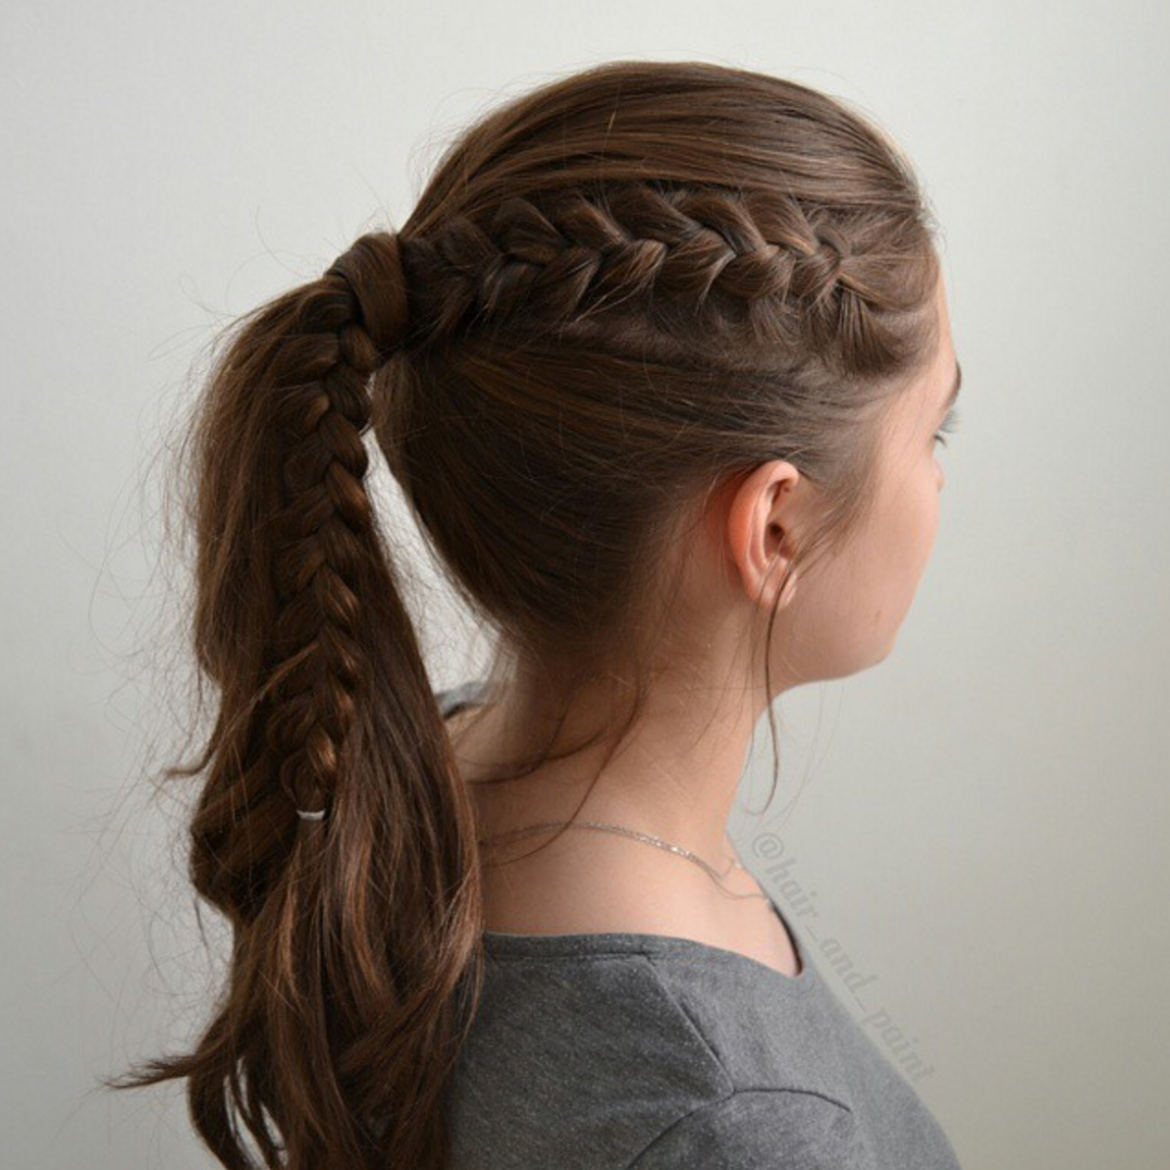 12+ Pretty & Easy School Hairstyles for Girls - The Organised Housewife